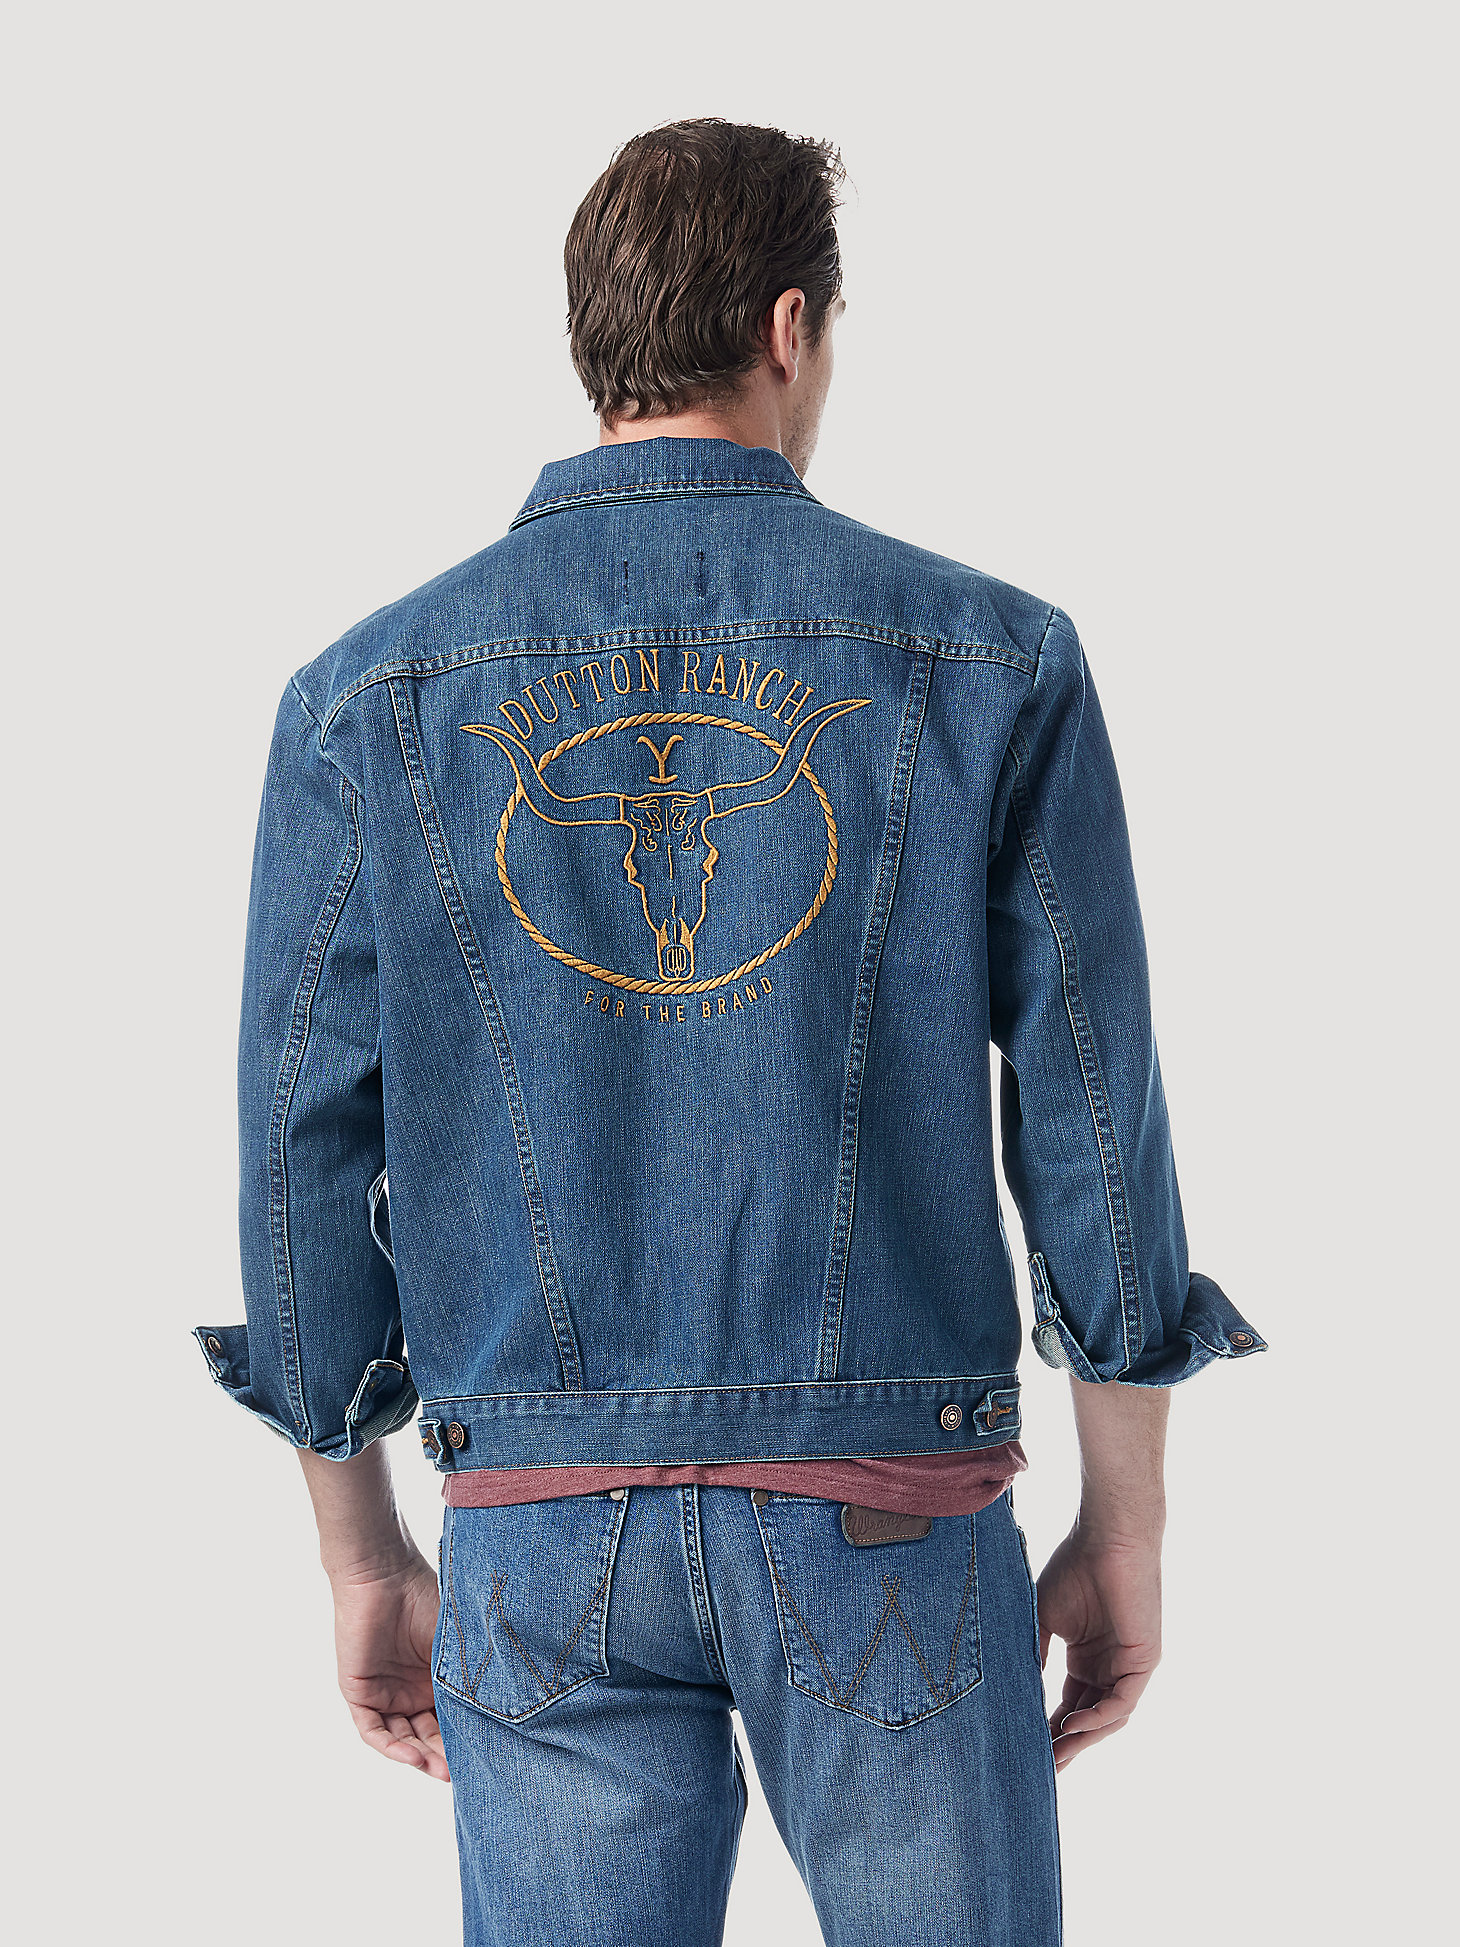 Wrangler x Yellowstone For the Brand Steer Head Unlined Denim Jacket in Rocky Top alternative view 1